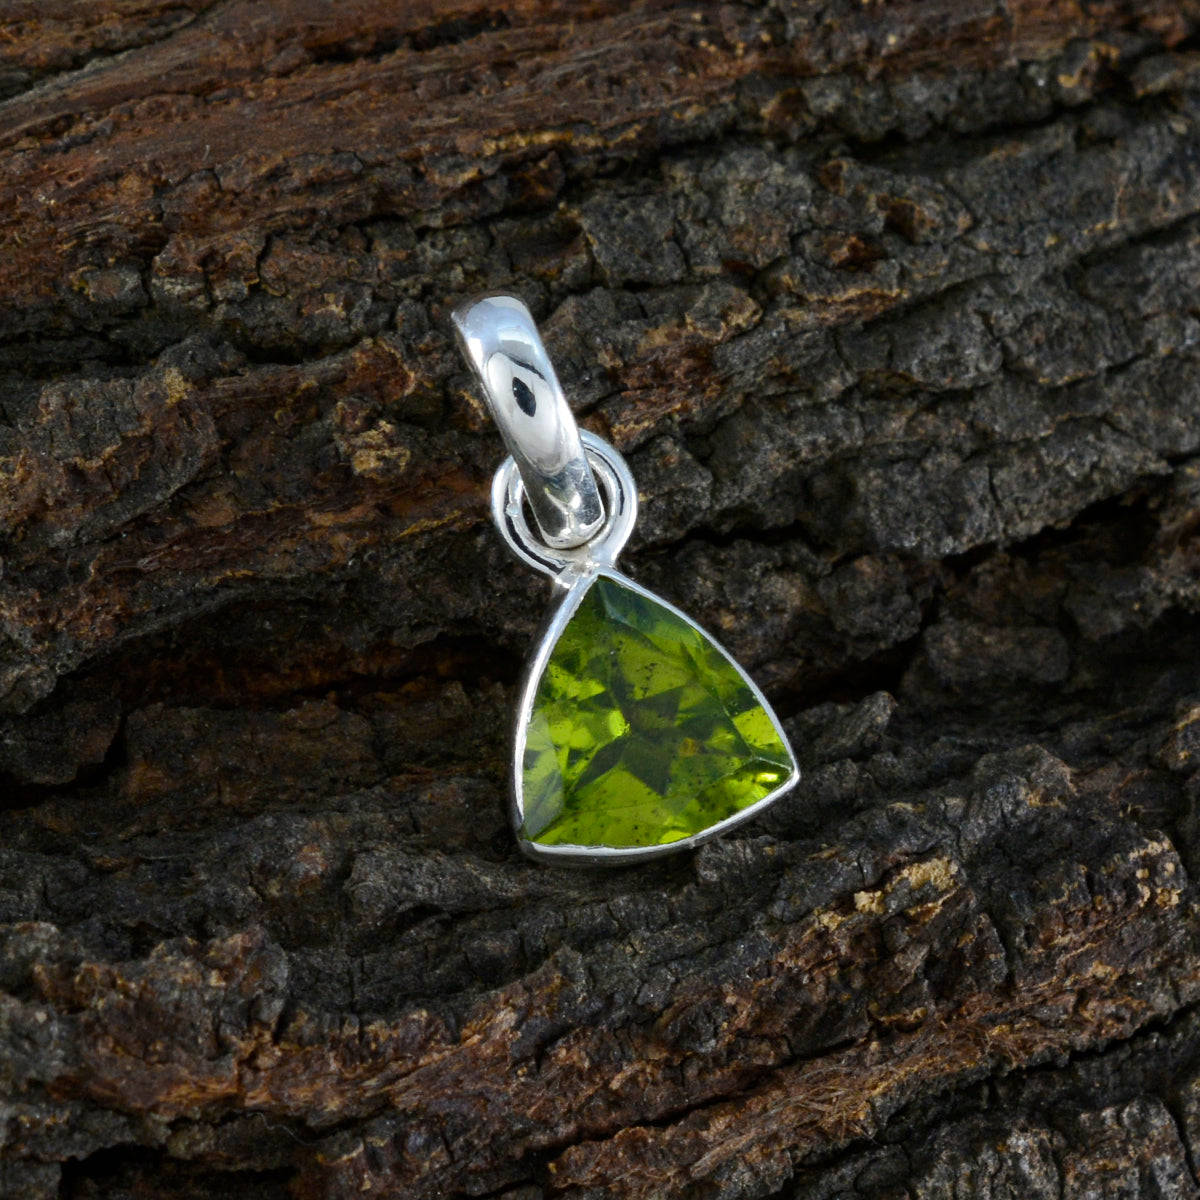 Riyo Irresistible Gemstone Trillion Faceted Green Peridot Sterling Silver Pendant Gift For Friend